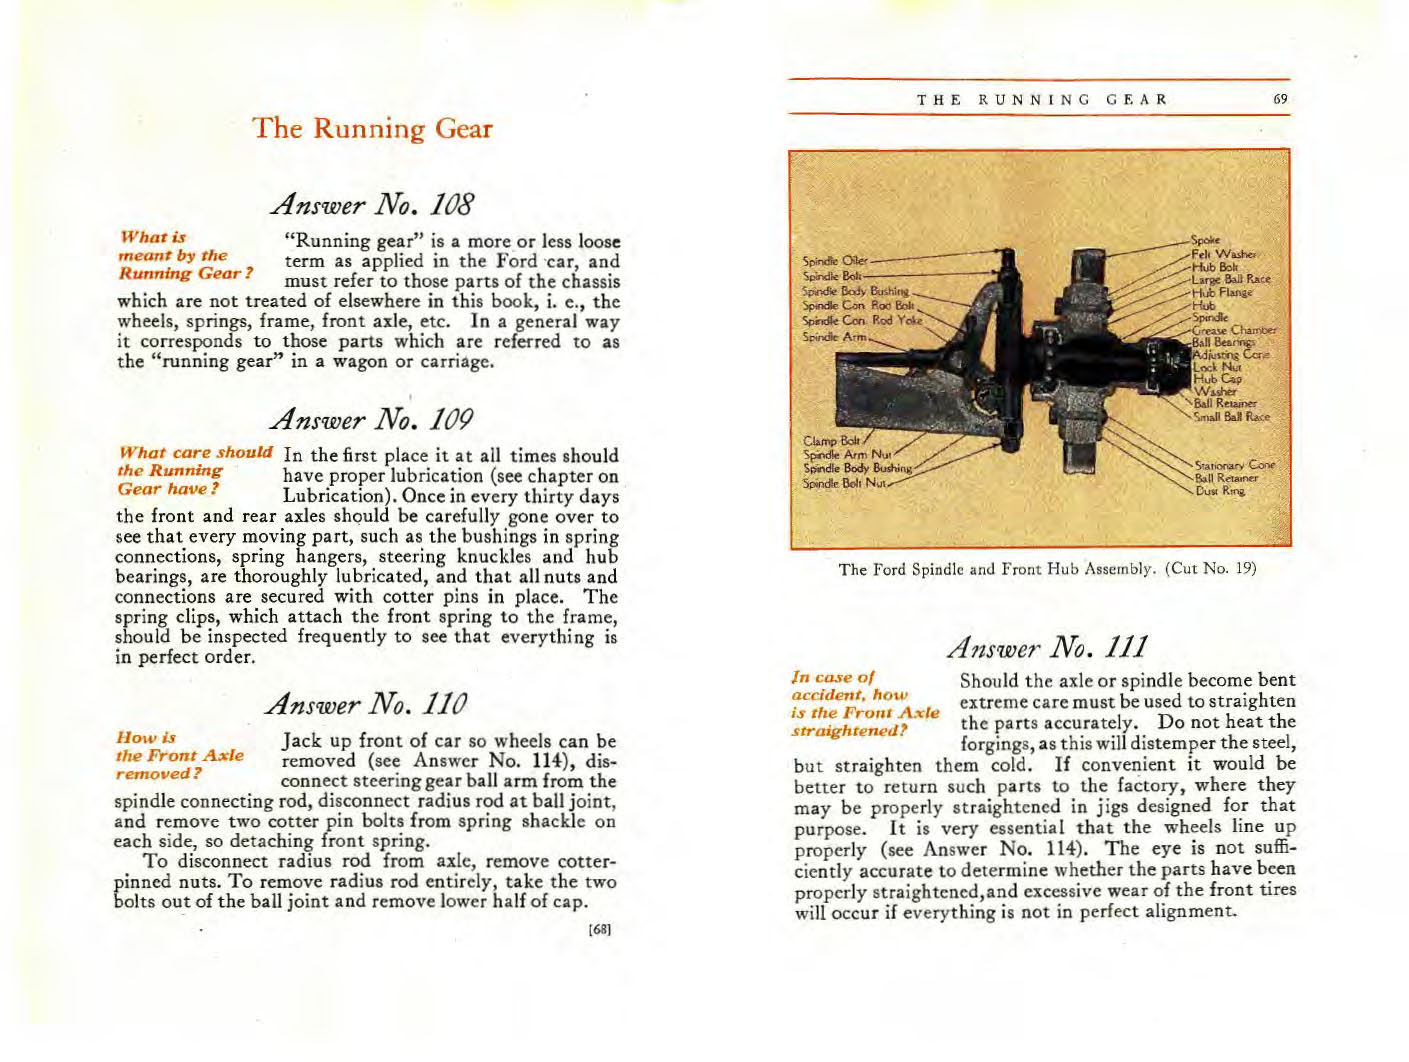 1915_Ford_Owners_Manual-68-69